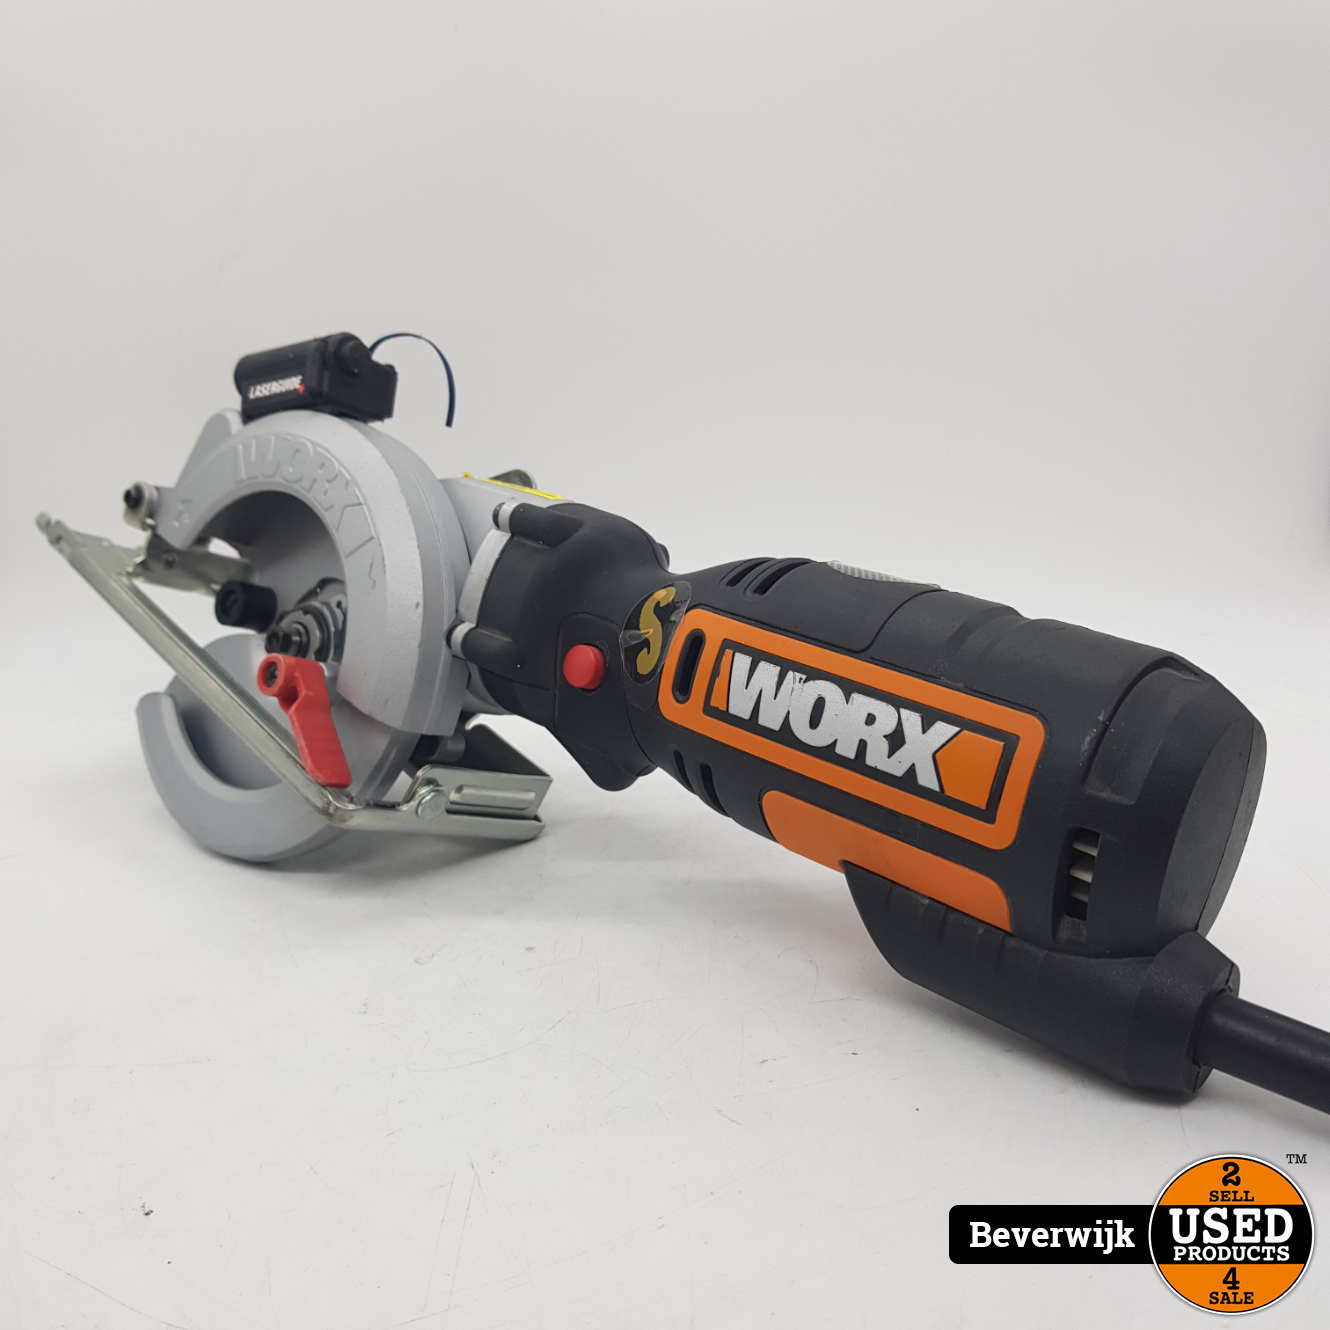 Worx WX427 - In Nette Staat! Used Products